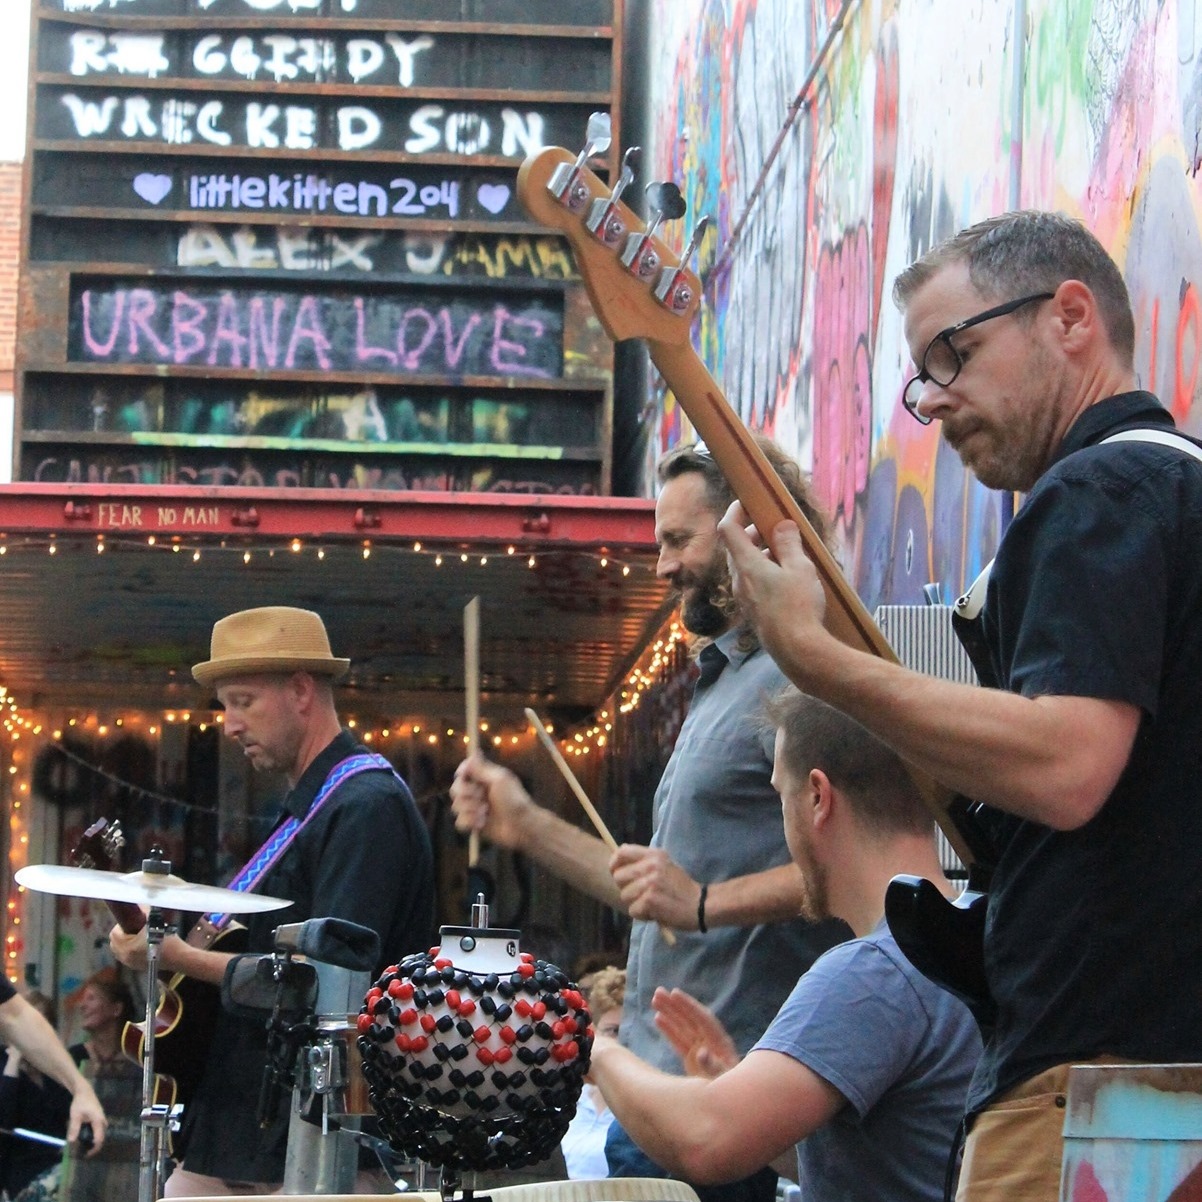 Four piece band Los Guapos perform in the Sipyard alleyway, with graffiti covered walls surrounding them. They each play their respective instrument. 